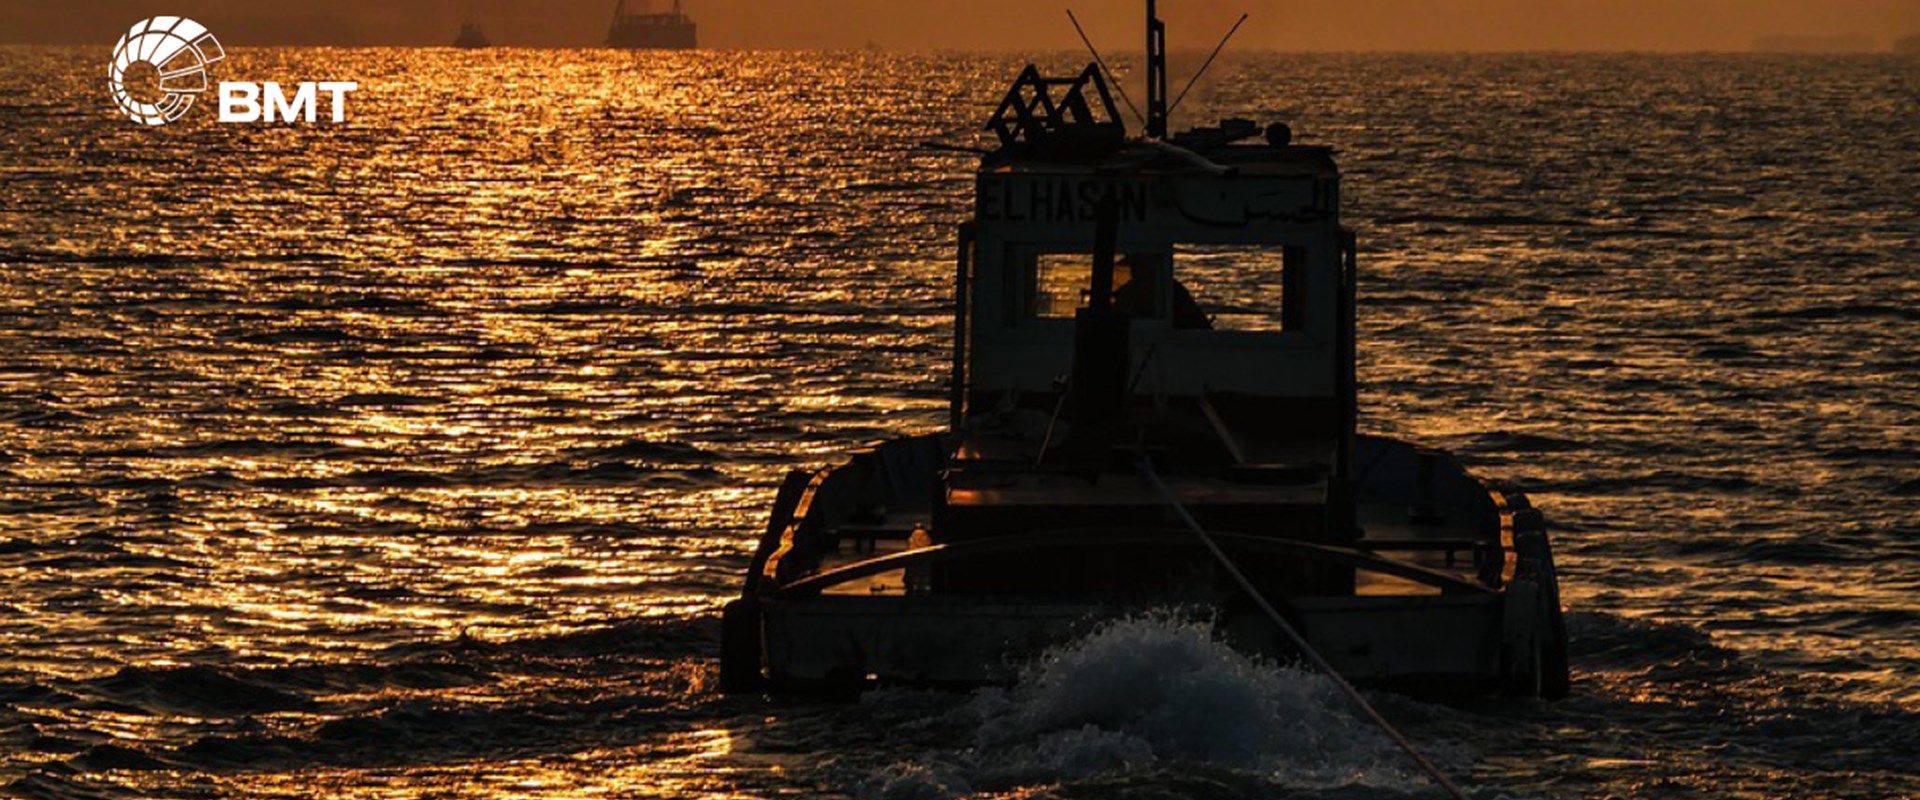 Picture of BMT designed tug at sunset